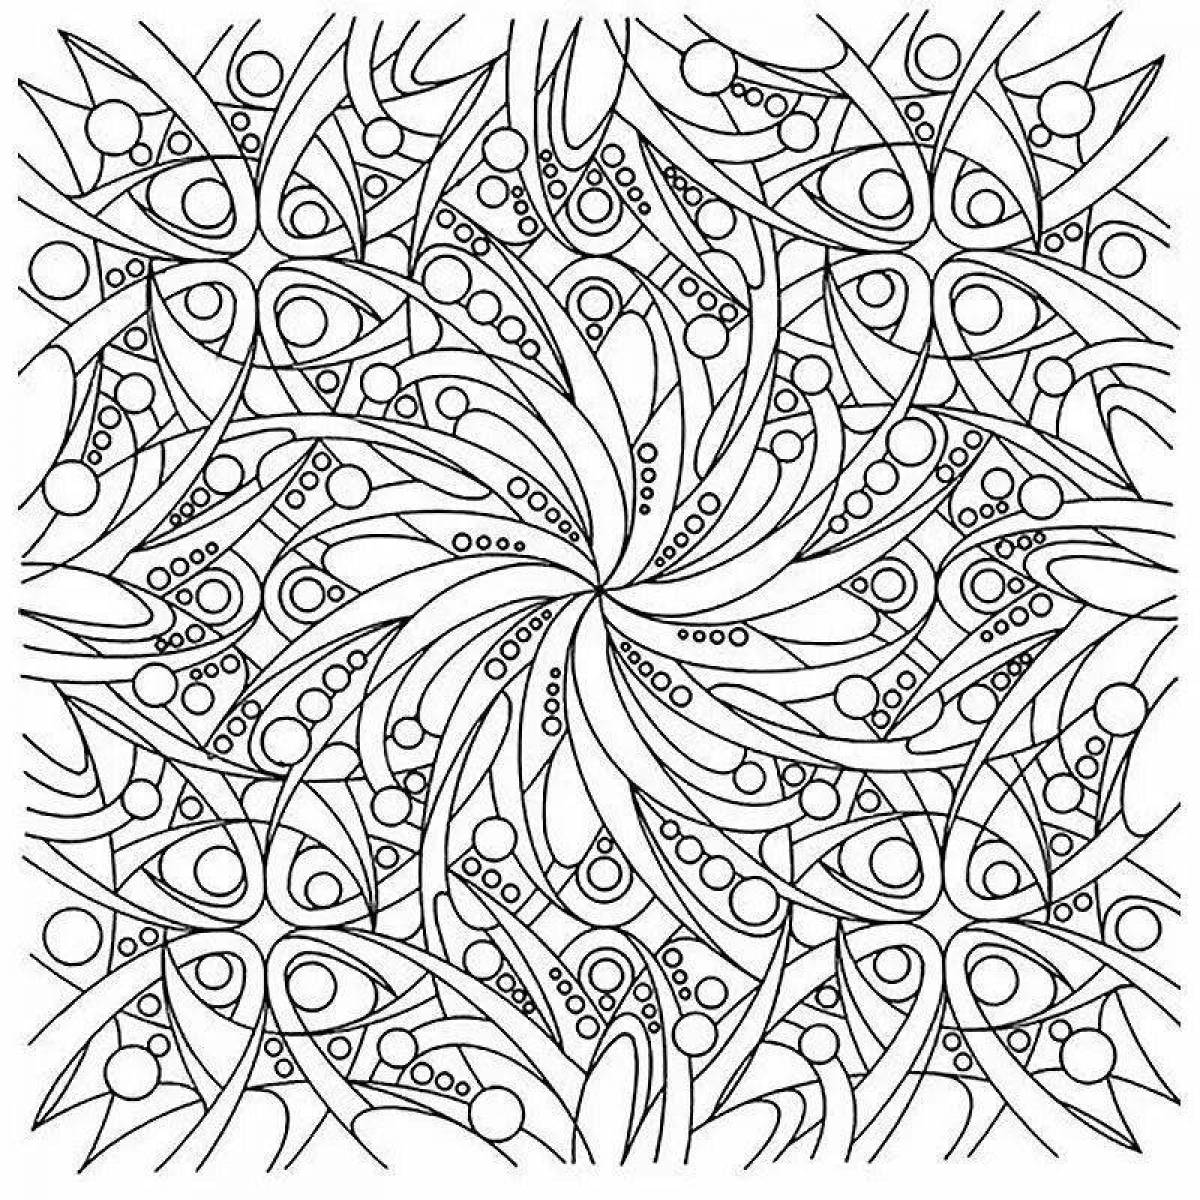 Fun coloring book to relieve stress